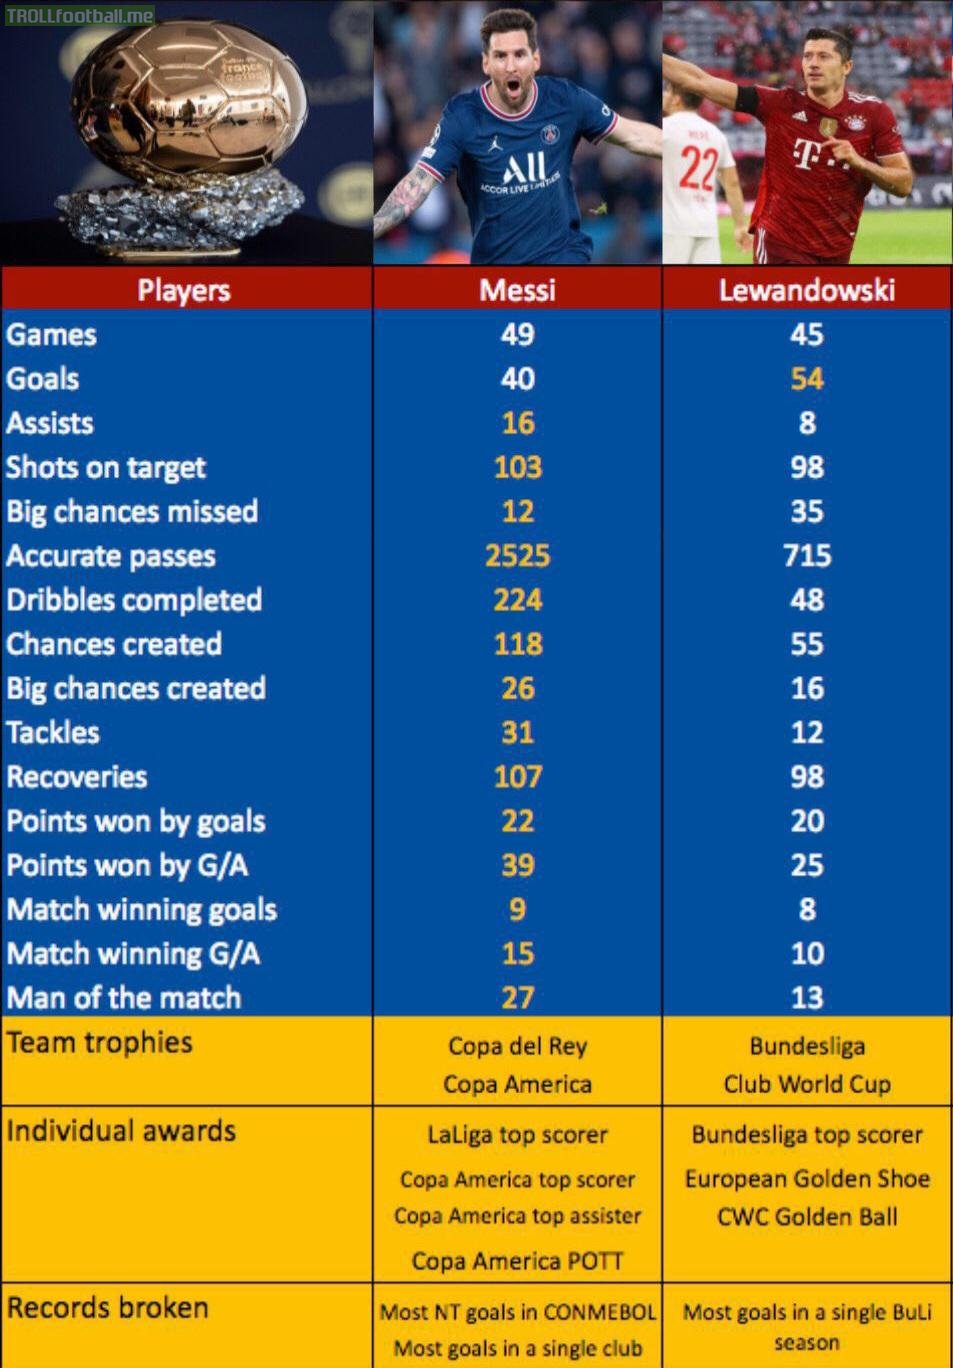 Messi and Lewandowski stats from January 1st to October 24th 2021